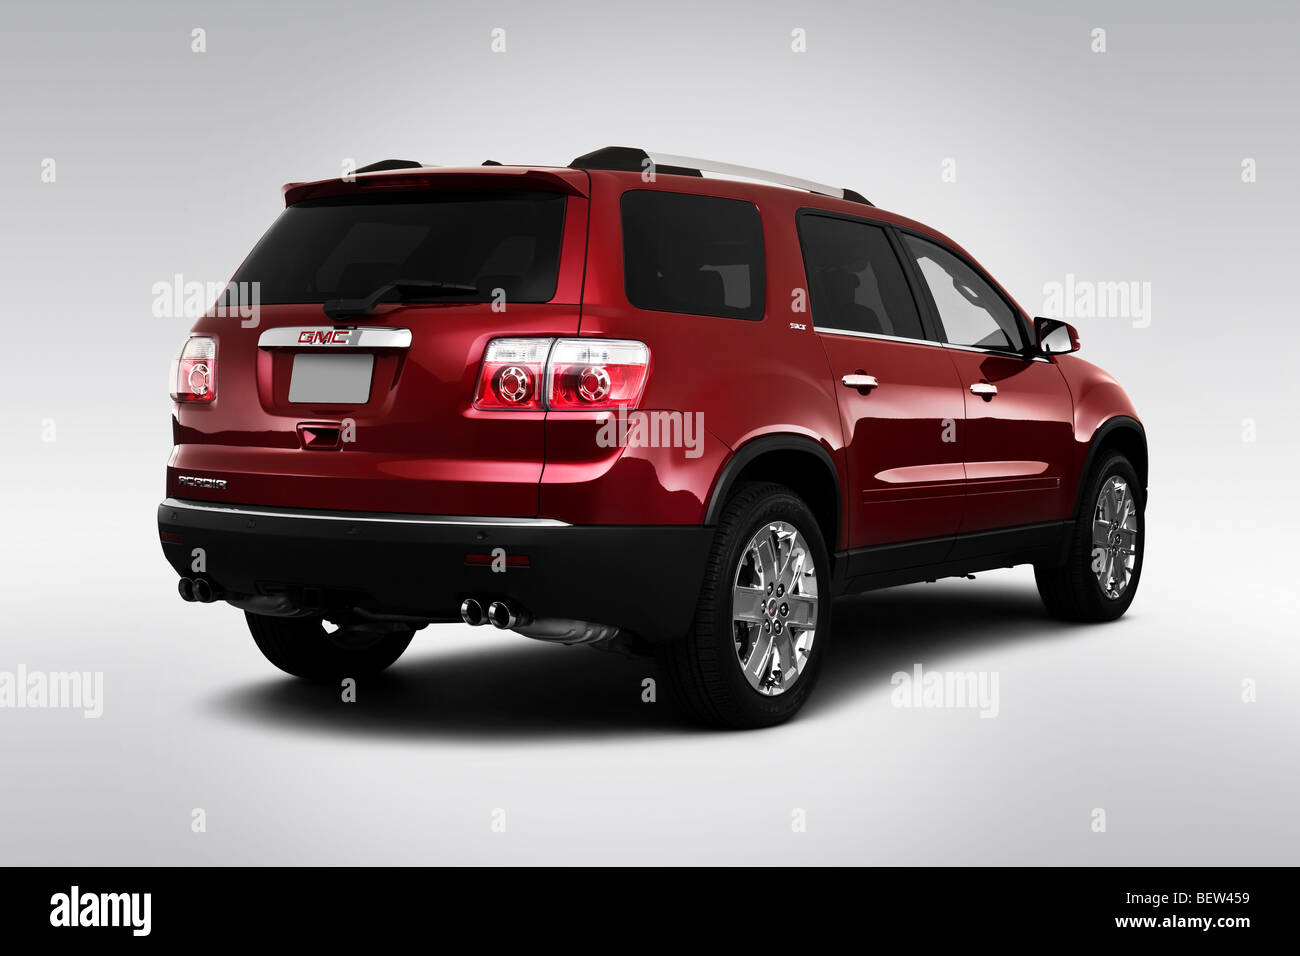 2010 GMC Acadia SLT-2 in Red - Rear angle view Stock Photo - Alamy